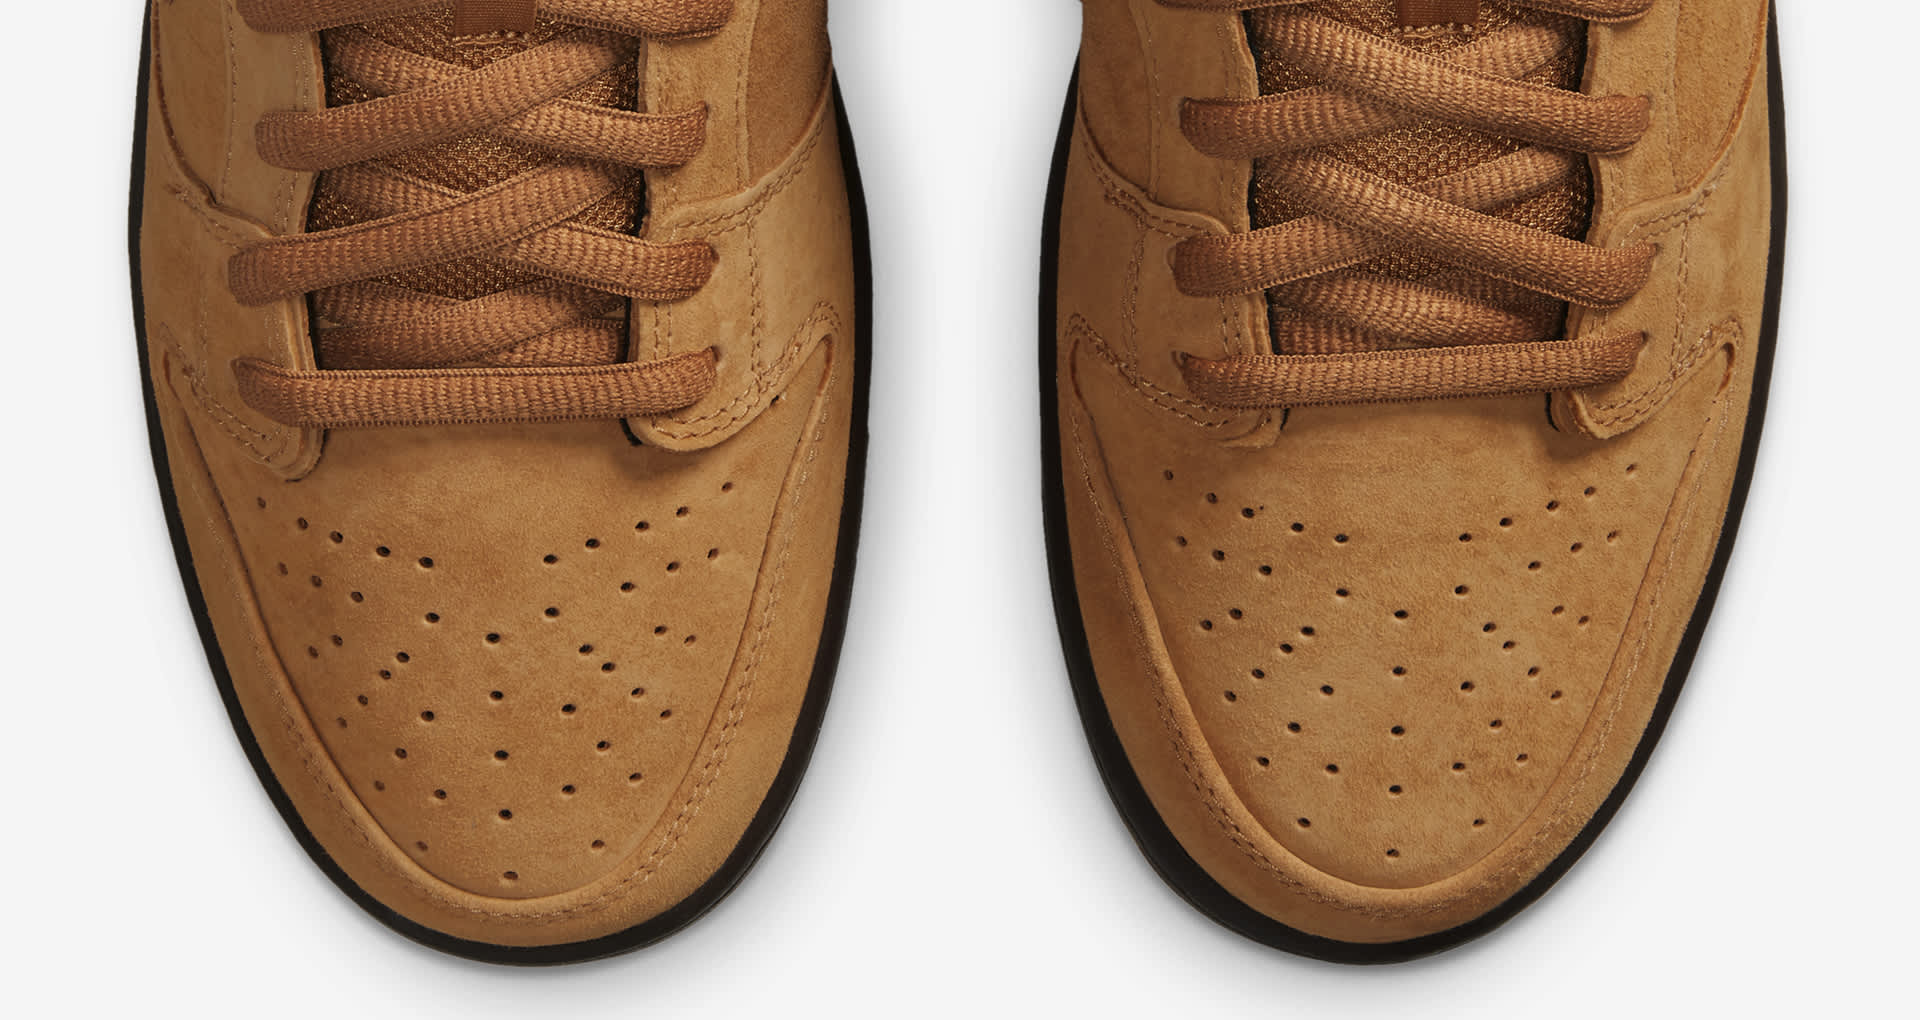 SB Dunk Low Pro 'Wheat' release date. Nike SNKRS GB